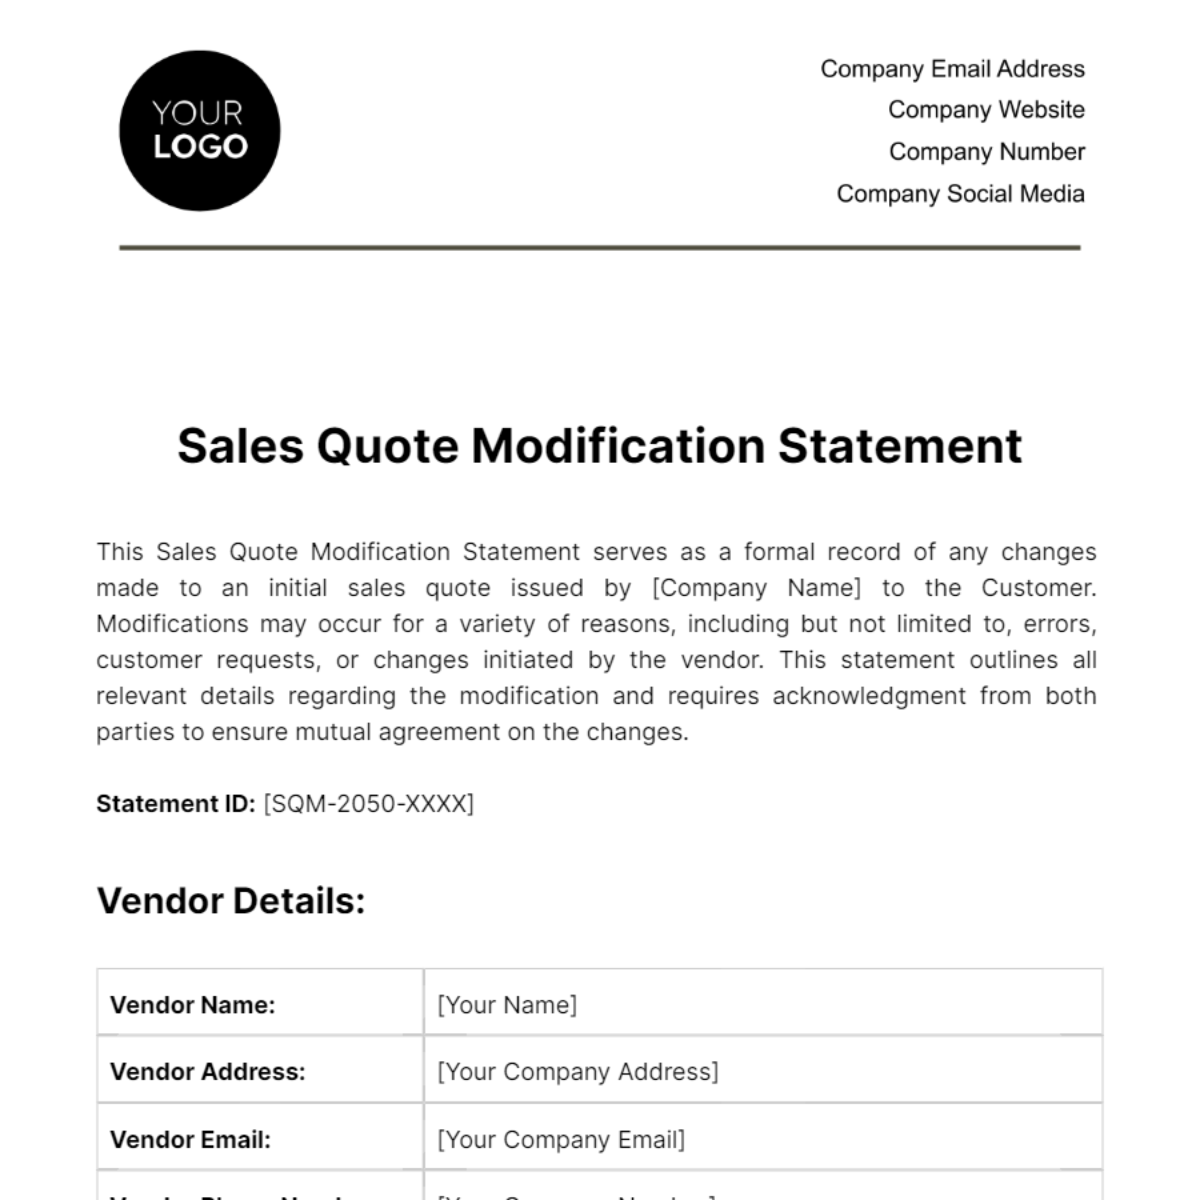 Sales Quote Modification Statement Template